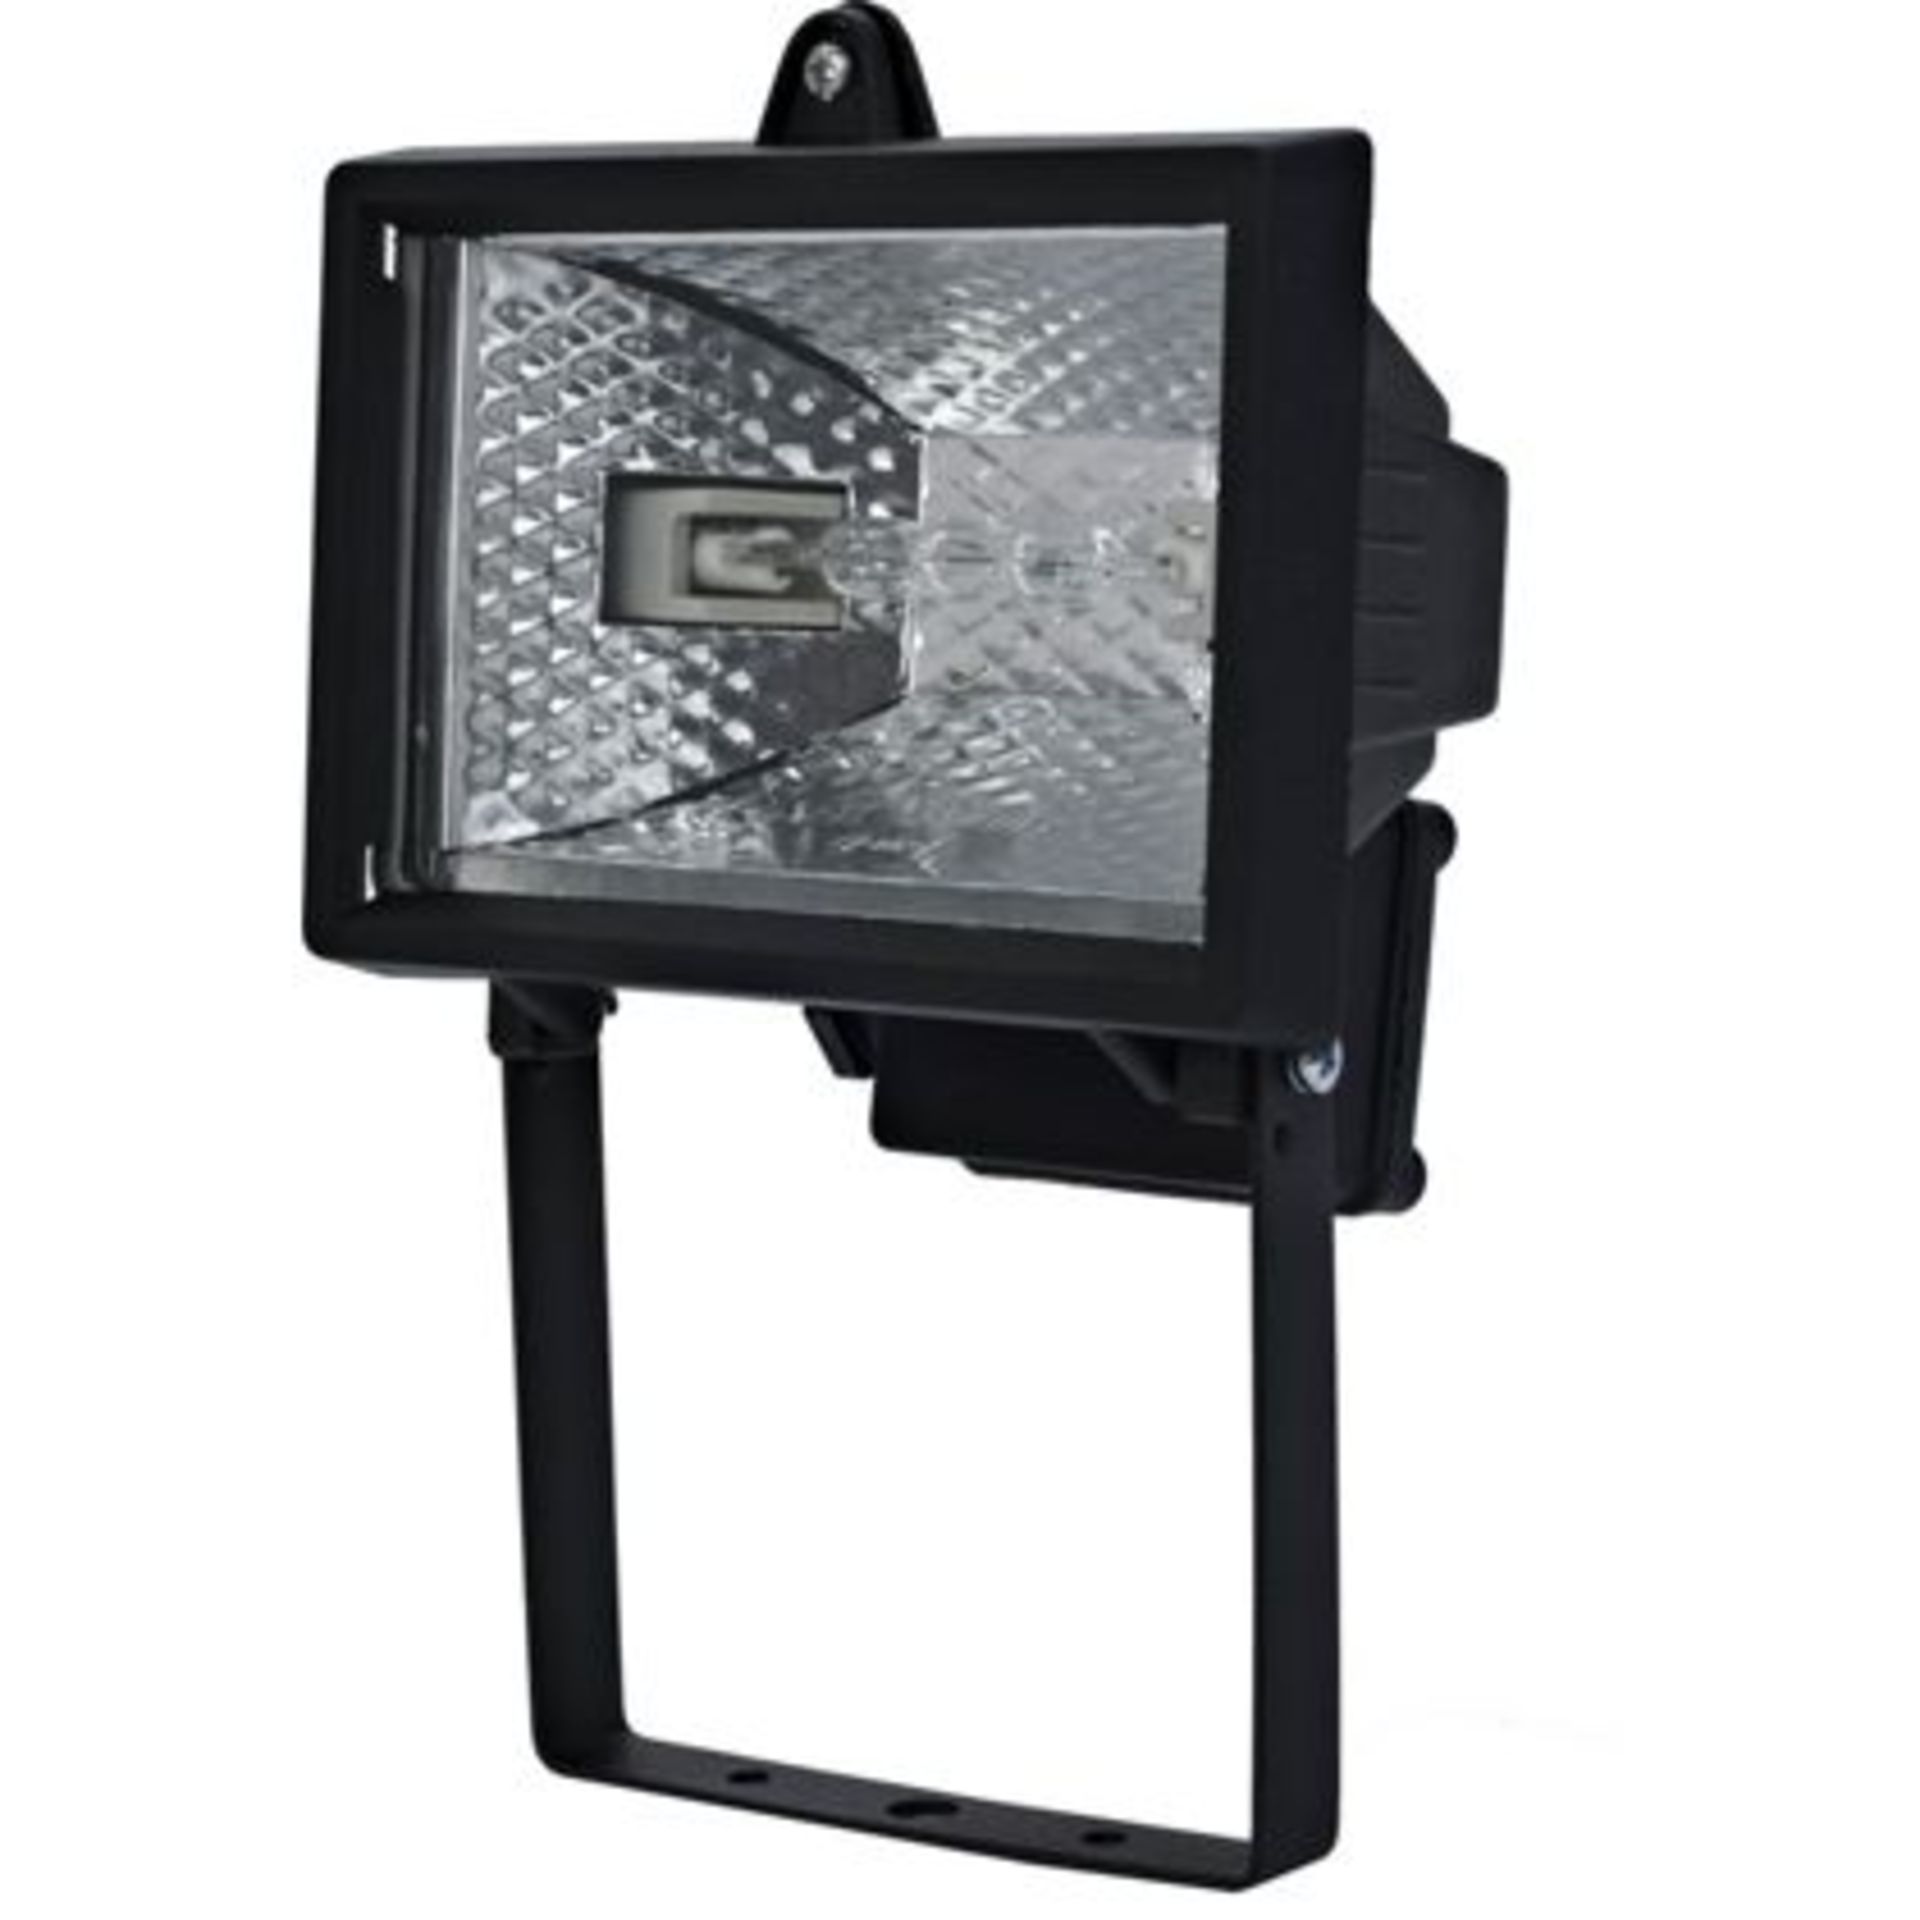 (G180) 3 x 120w Aluminium Outdoor Floodlights - Black. 120W Floodlight is an ideal way to light your - Image 2 of 2